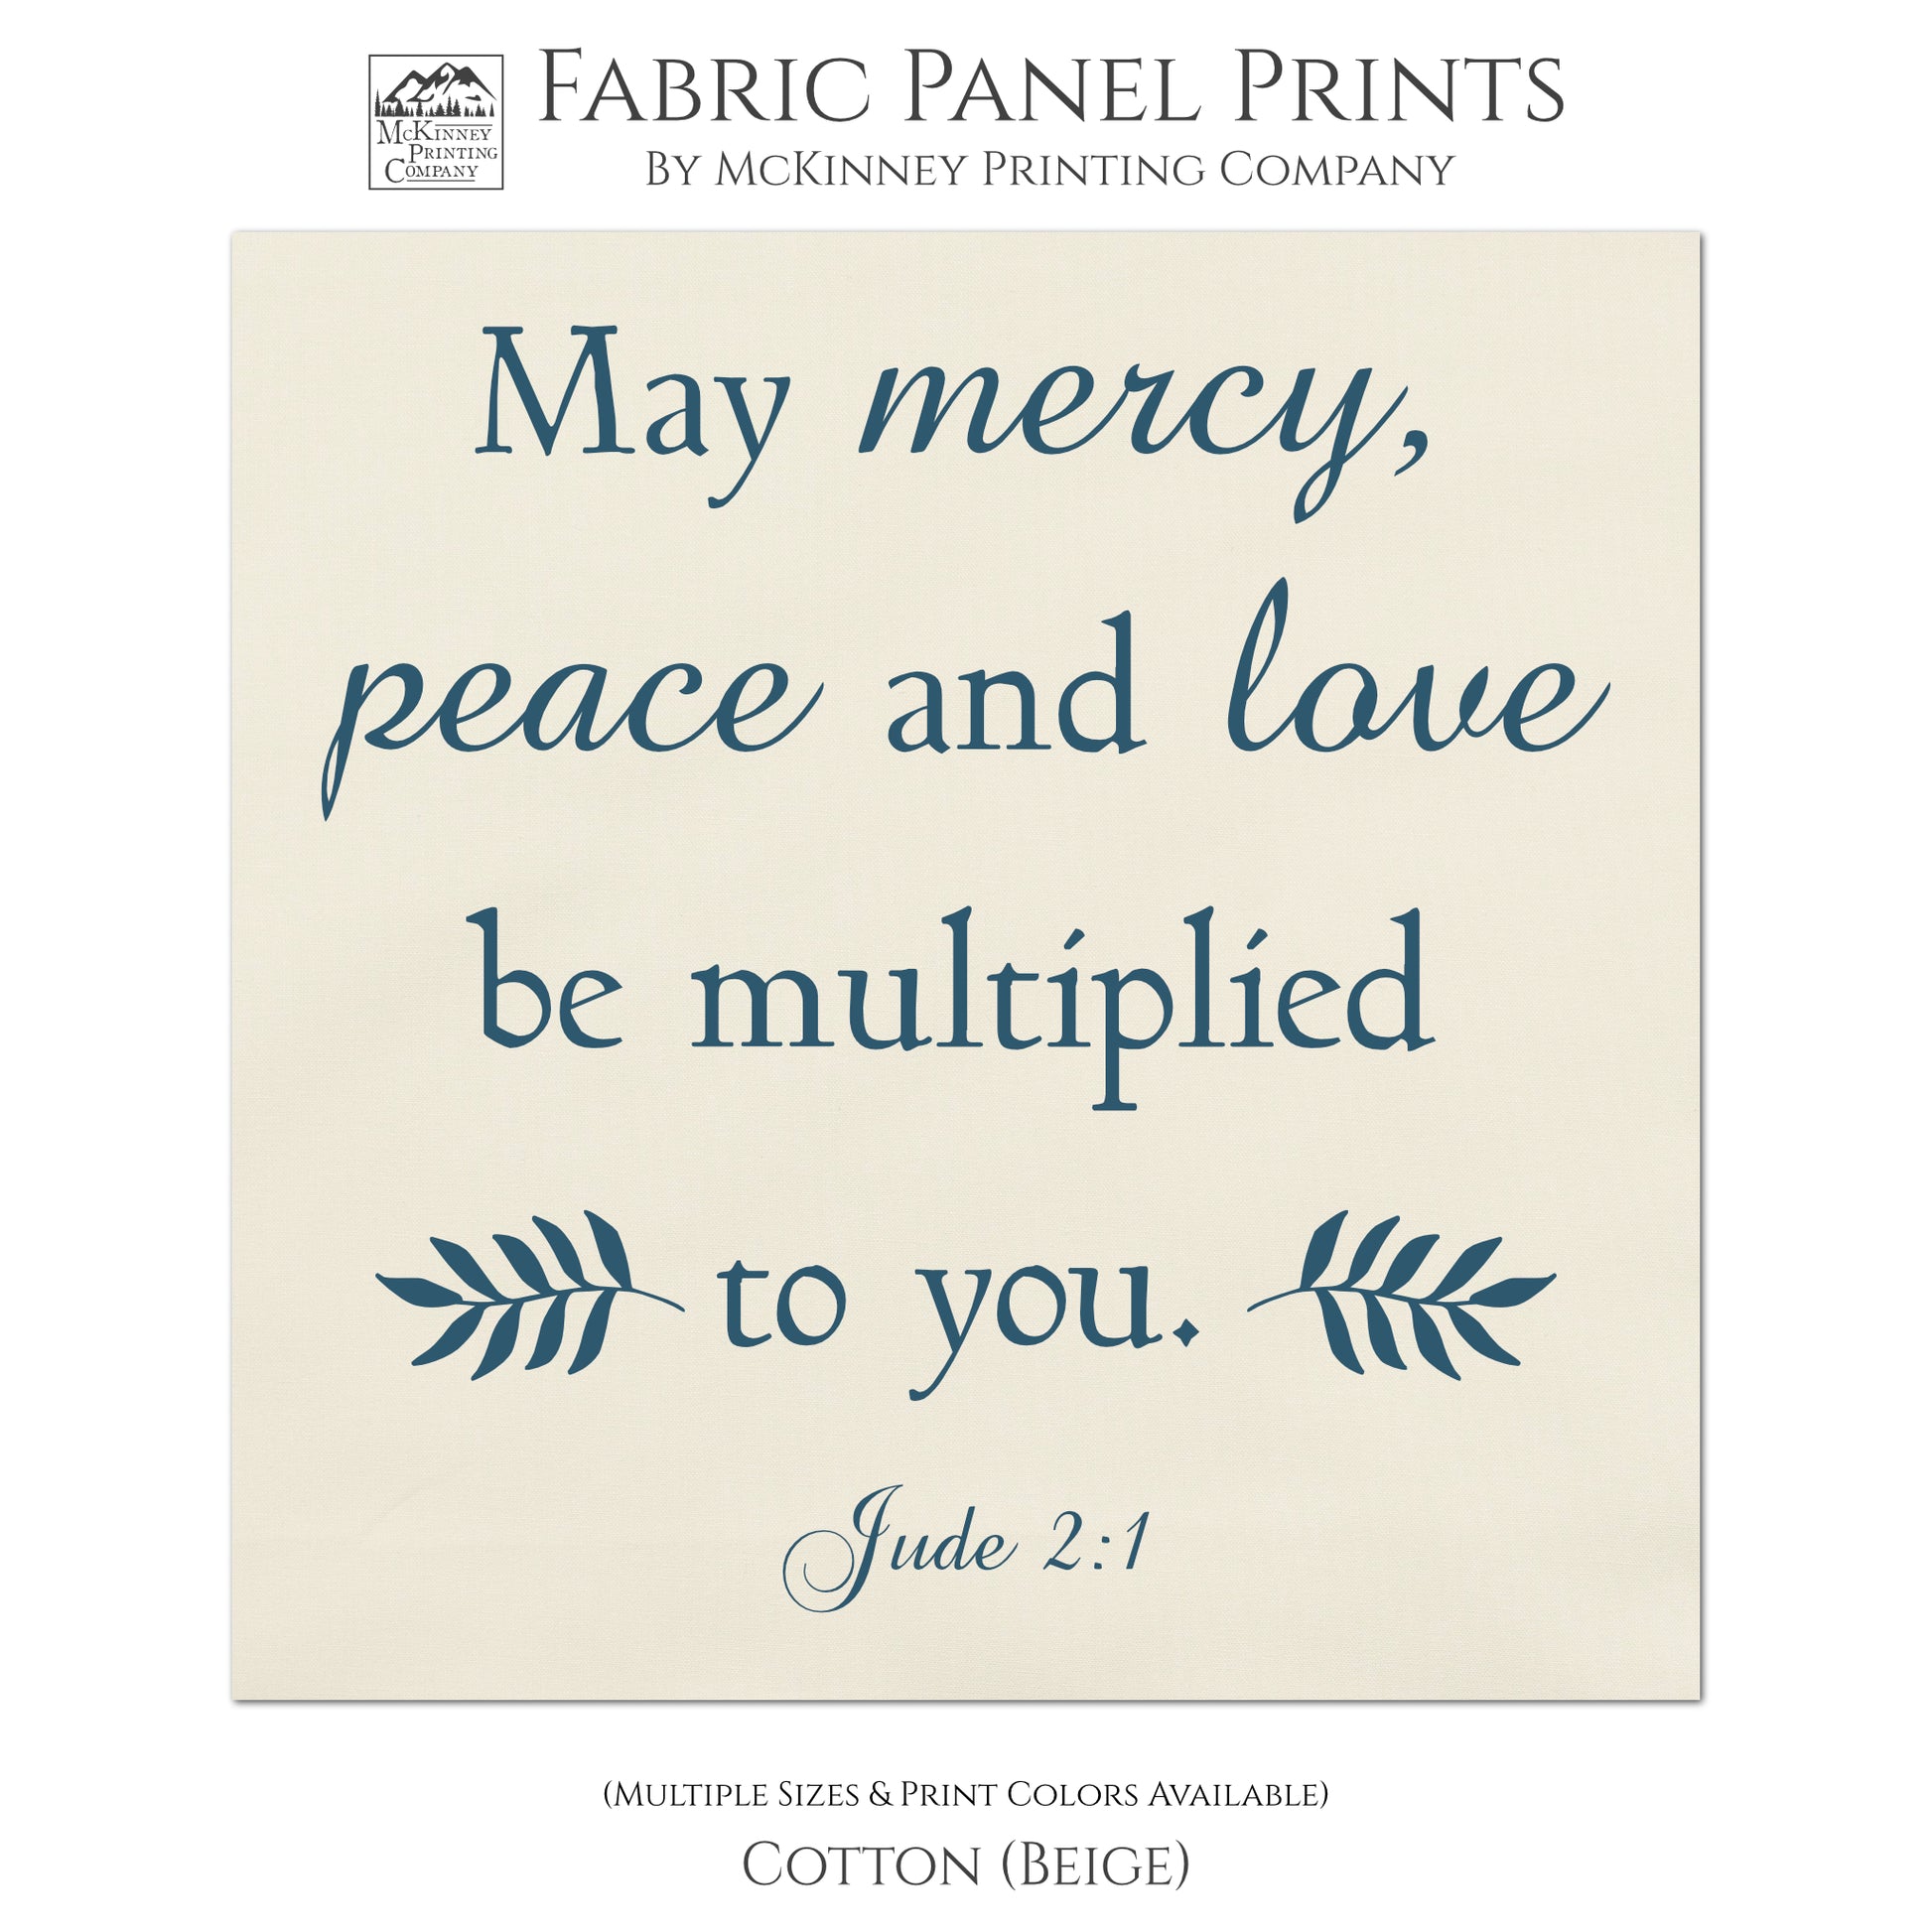 May mercy, peace and love be multiplied to you. Jude 2:1 - Religious Fabric, Christian Scripture, Large Quilt Block - Cotton